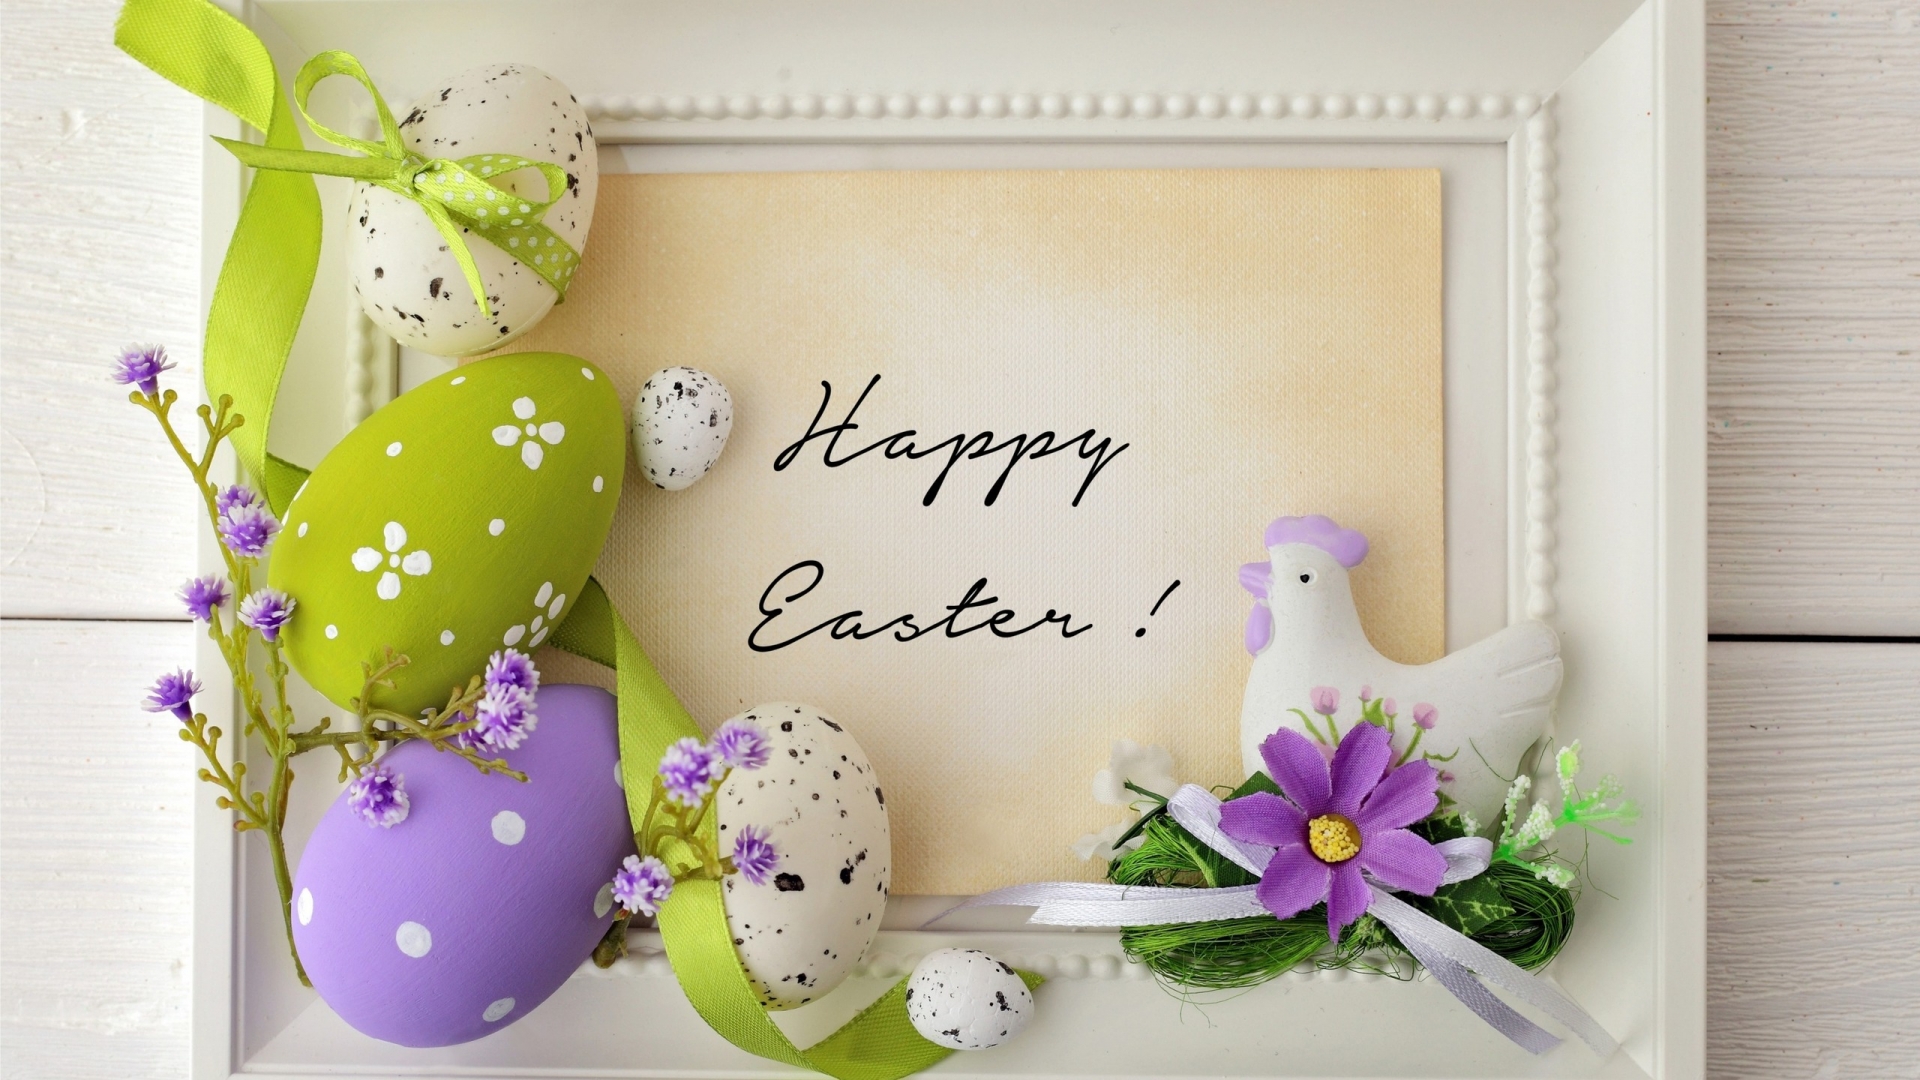 Happy Easter 2015 for 1920 x 1080 HDTV 1080p resolution